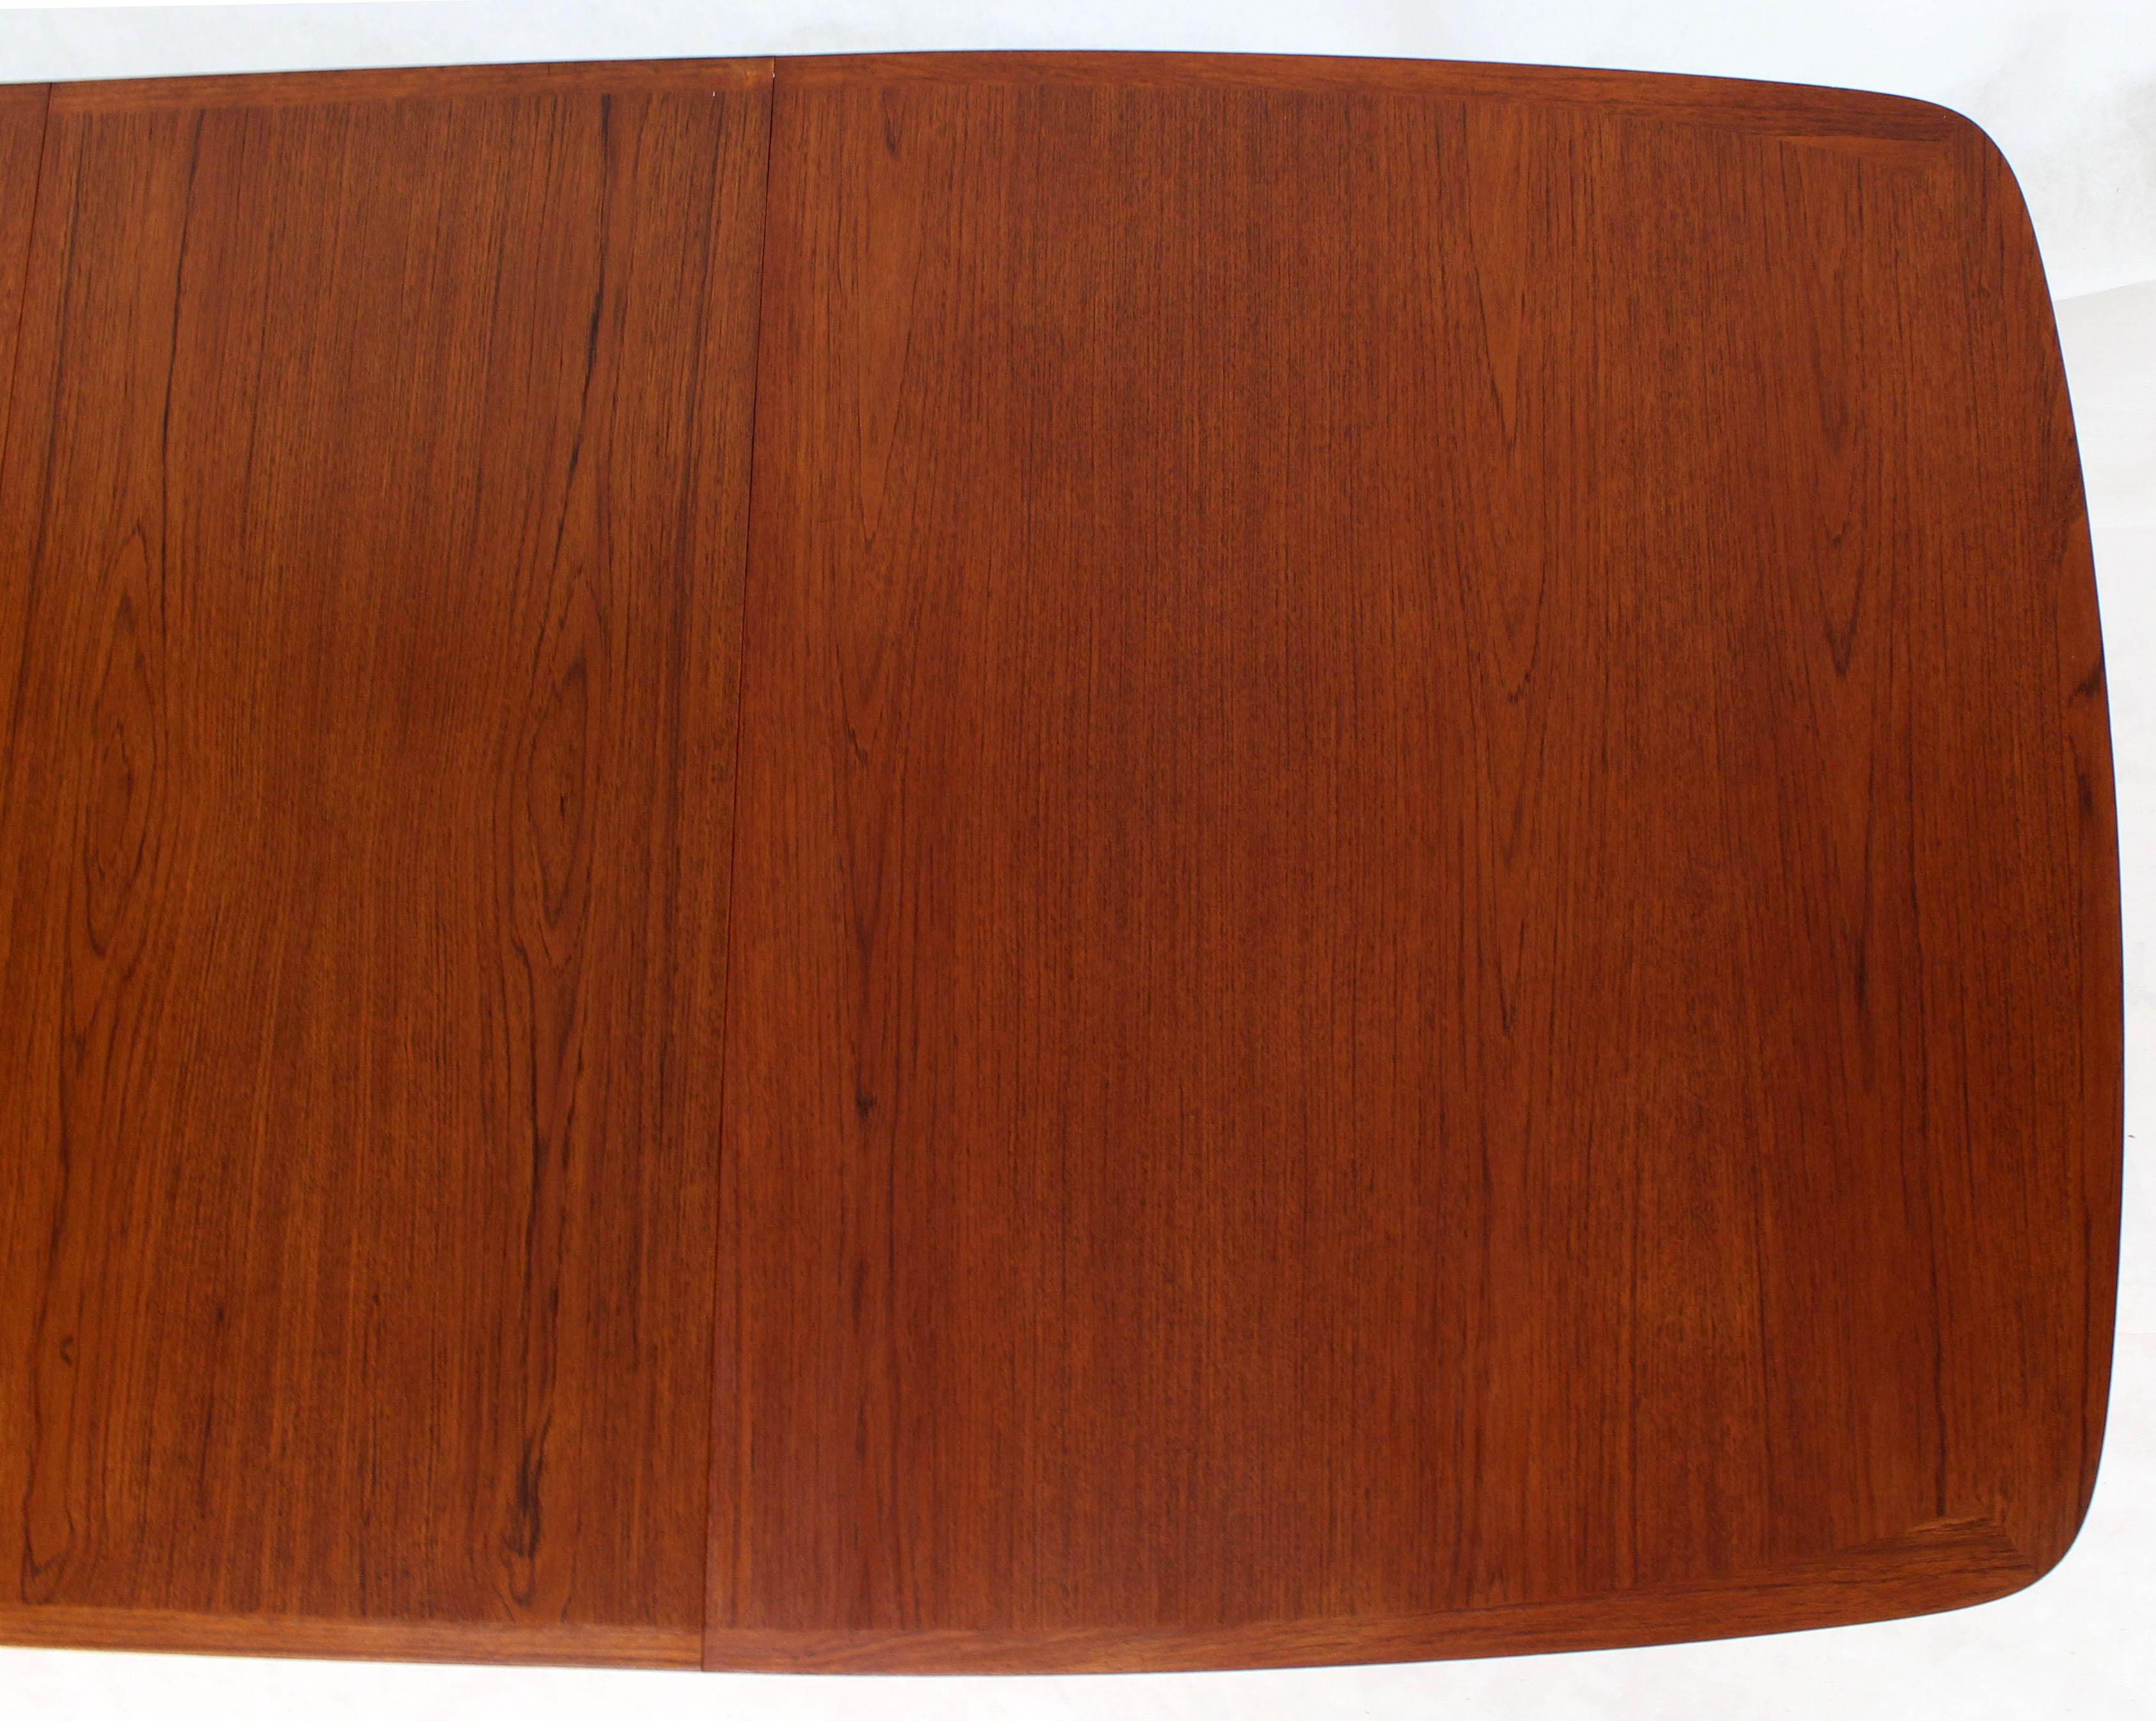 Danish Teak Mid-Century Modern Dining Banquet Table Self Storing Folding Leafs For Sale 1